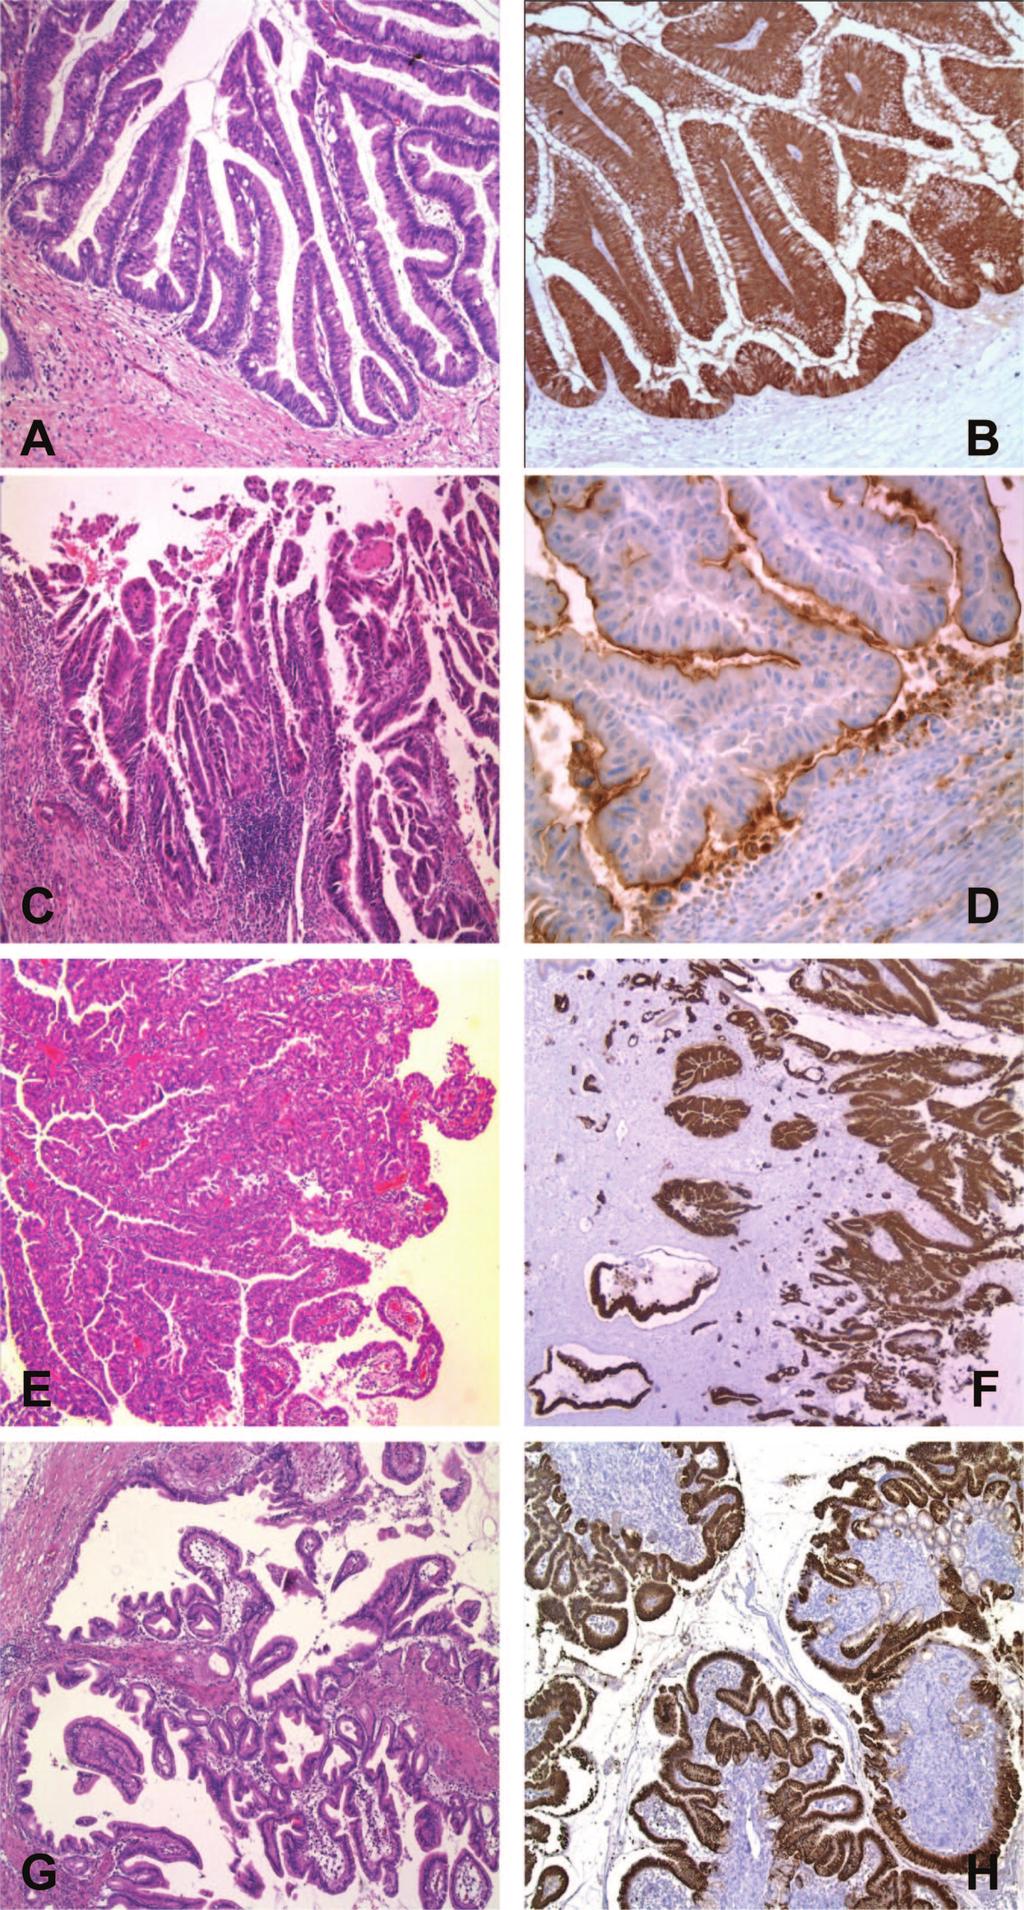 Gru tzmann, Niedergethmann, Pilarsky et al. 1297 Figure 2. Histopathological subtypes of intraductal papillary mucinous neoplasm (IPMN) of the pancreas and their typical mucin patterns.